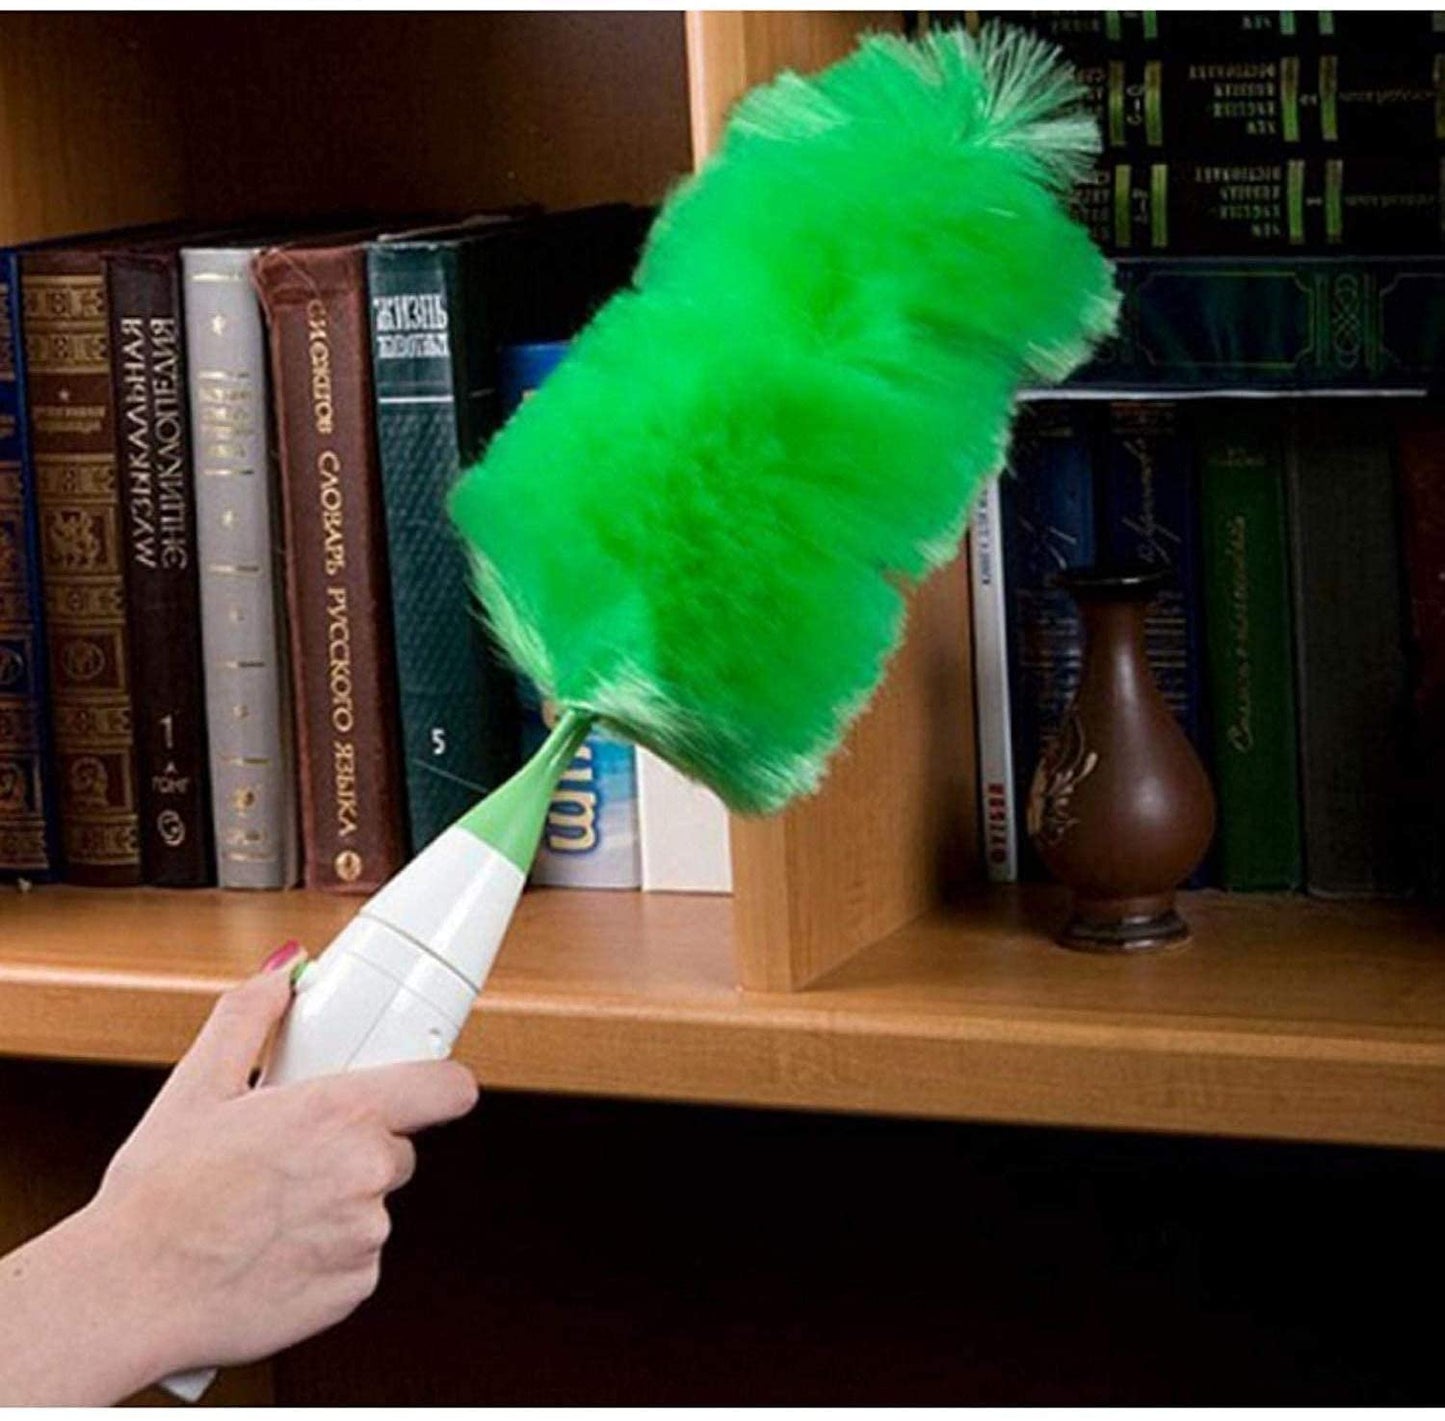 SpinJet™ Spin Duster Electric Cleaner Microfiber Brush